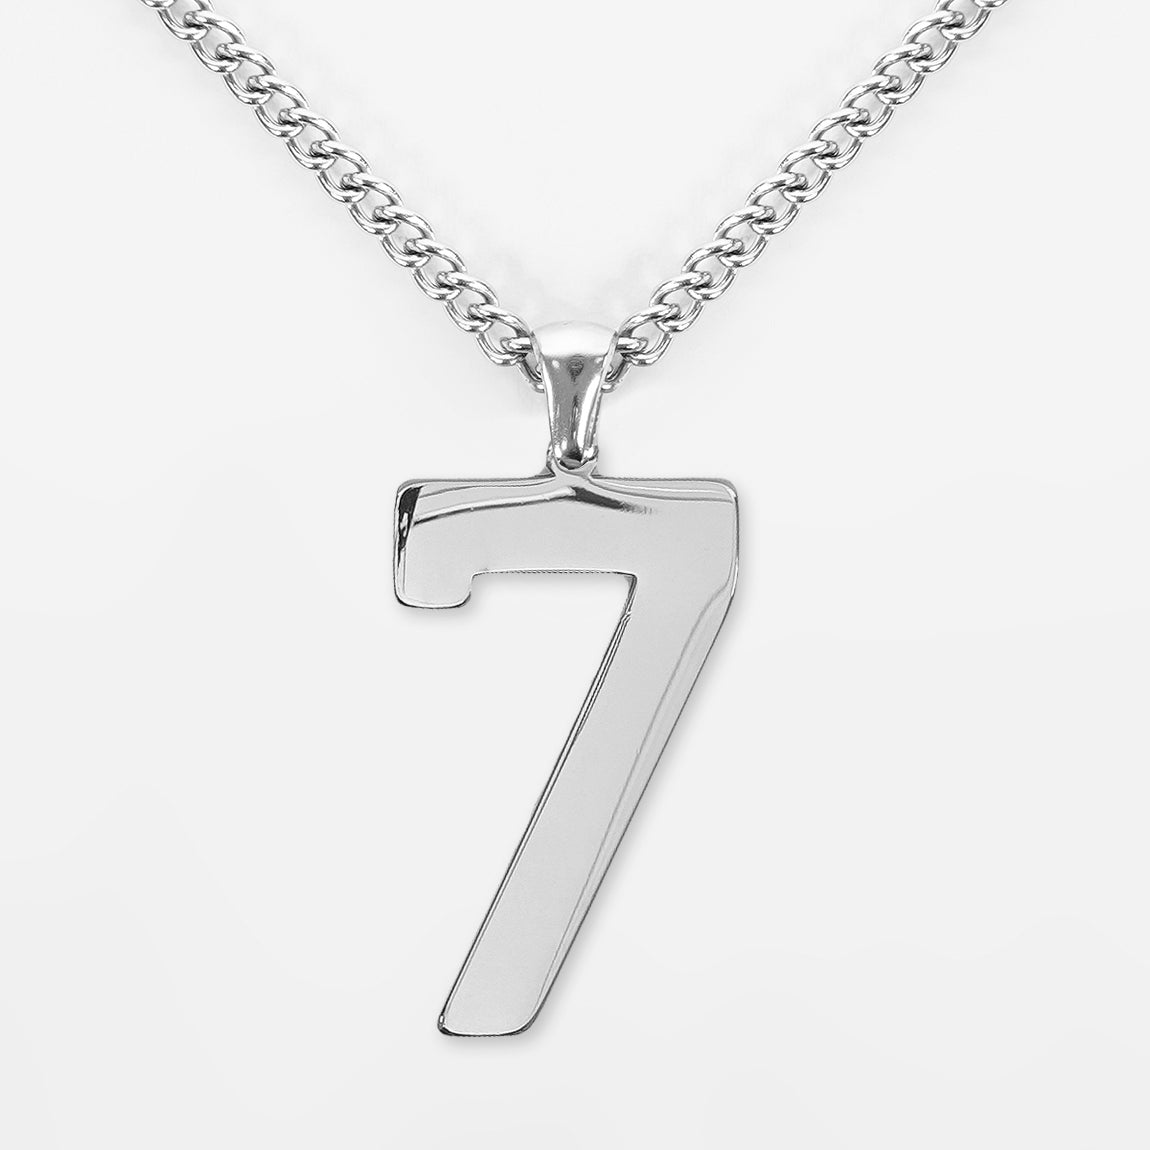 7 Number Pendant with Chain Necklace - Stainless Steel